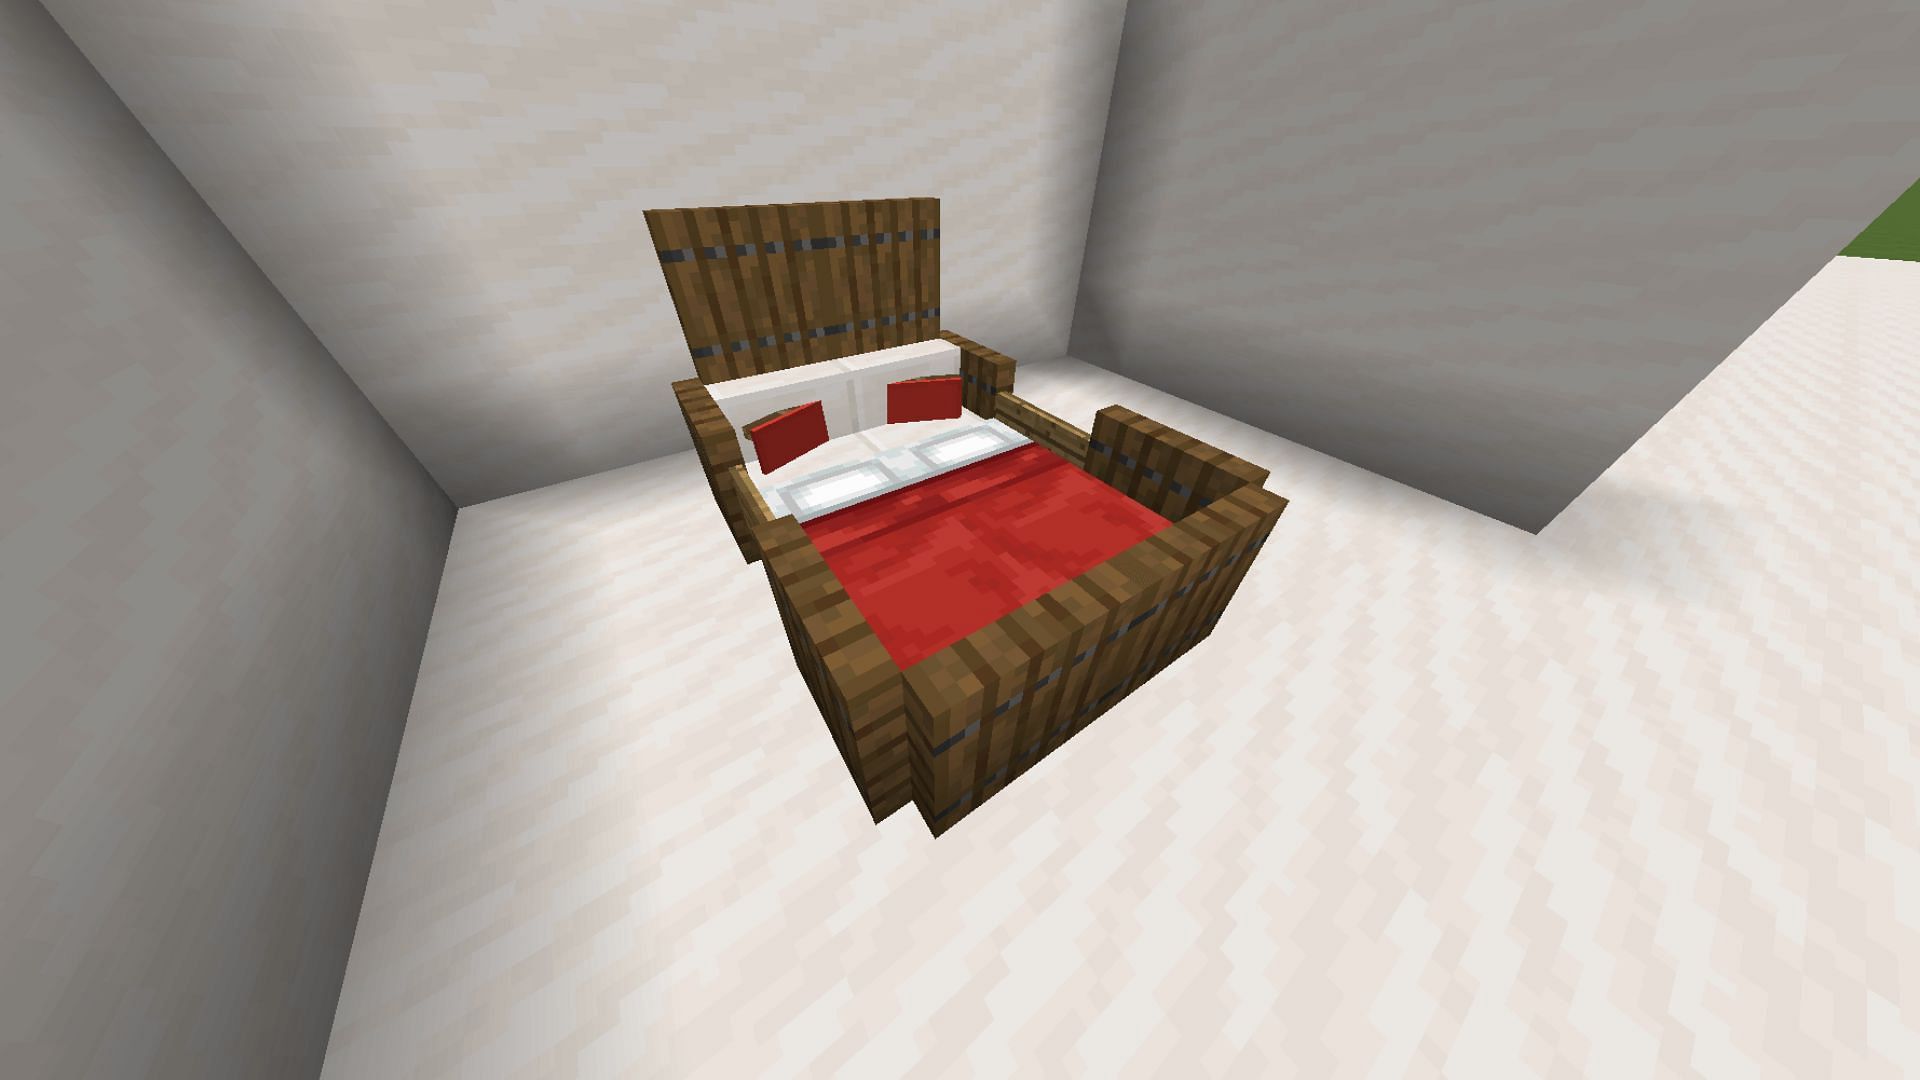 Players can decorate the bed itself in Minecraft (Image via minecraftdesigns.com)